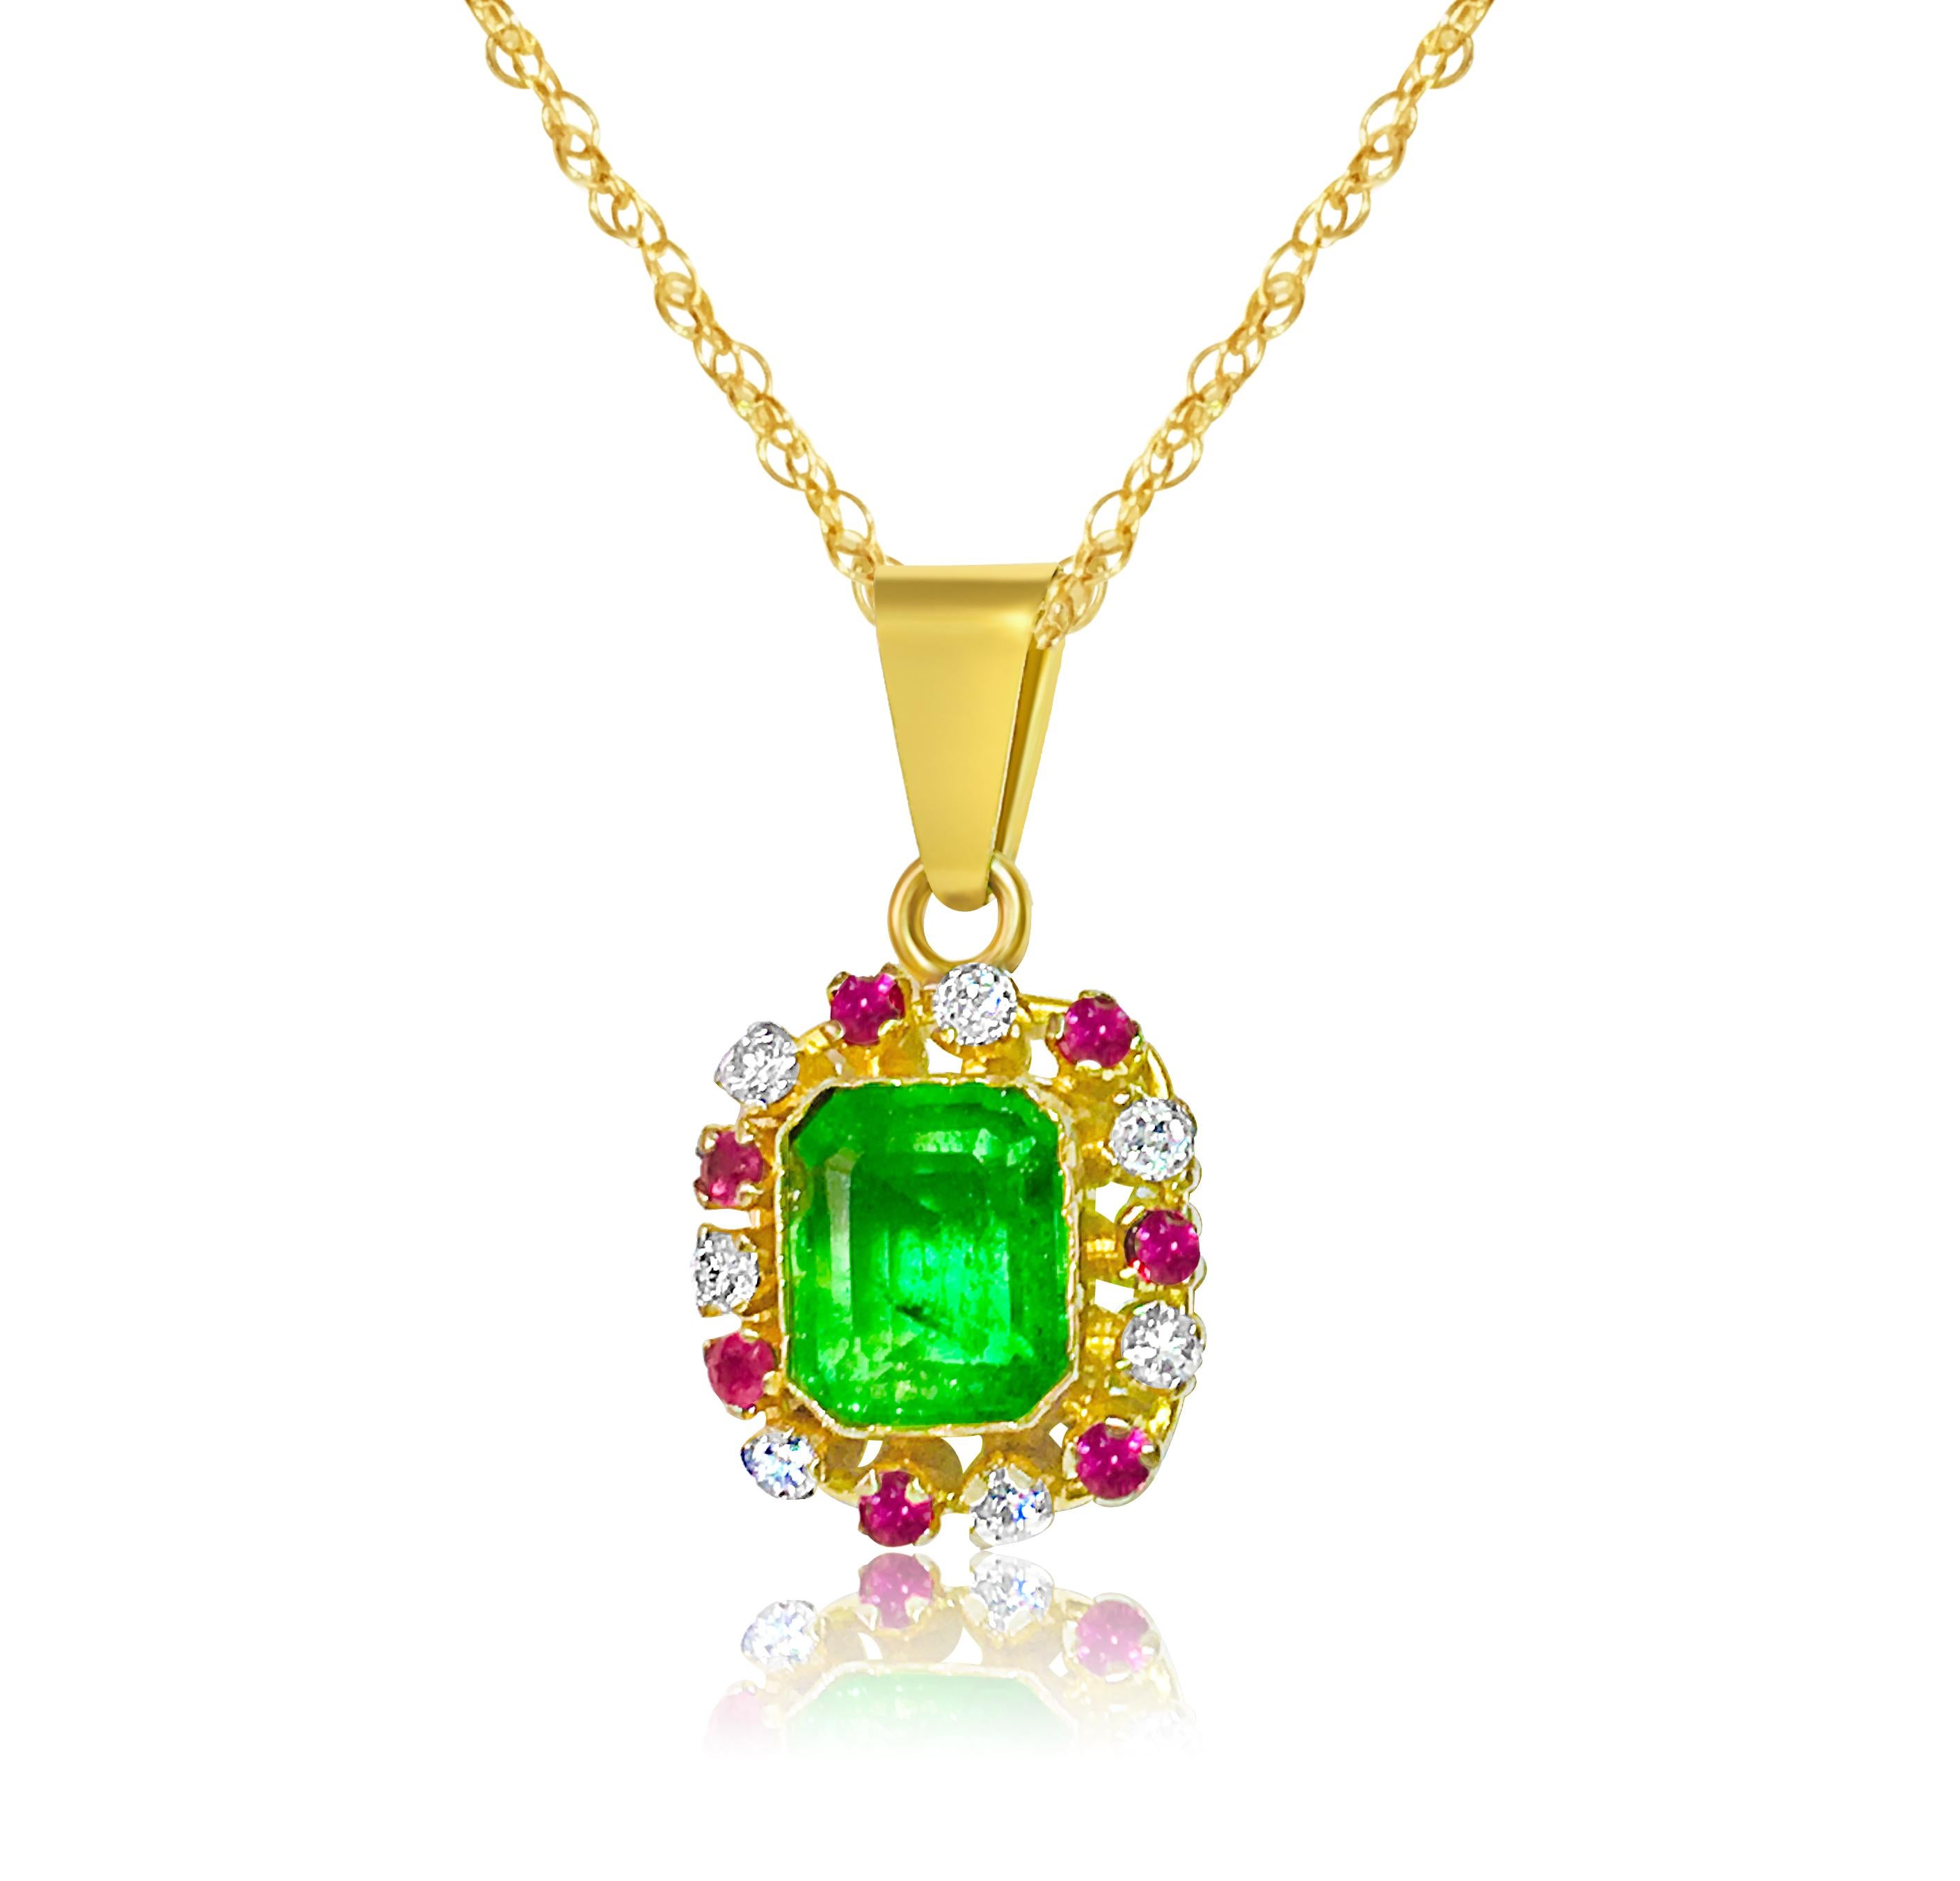 Metal: 18K yellow gold. 
0.20 carat diamonds, SI clarity and G color. Round brilliant cut. 
0.30 carat total Burma ruby. Round shape
2.50 carat emerald. Emerald cut.
TCW of all gemstones 3.00 carats. 
All gemstones are 100% natural earth mined.